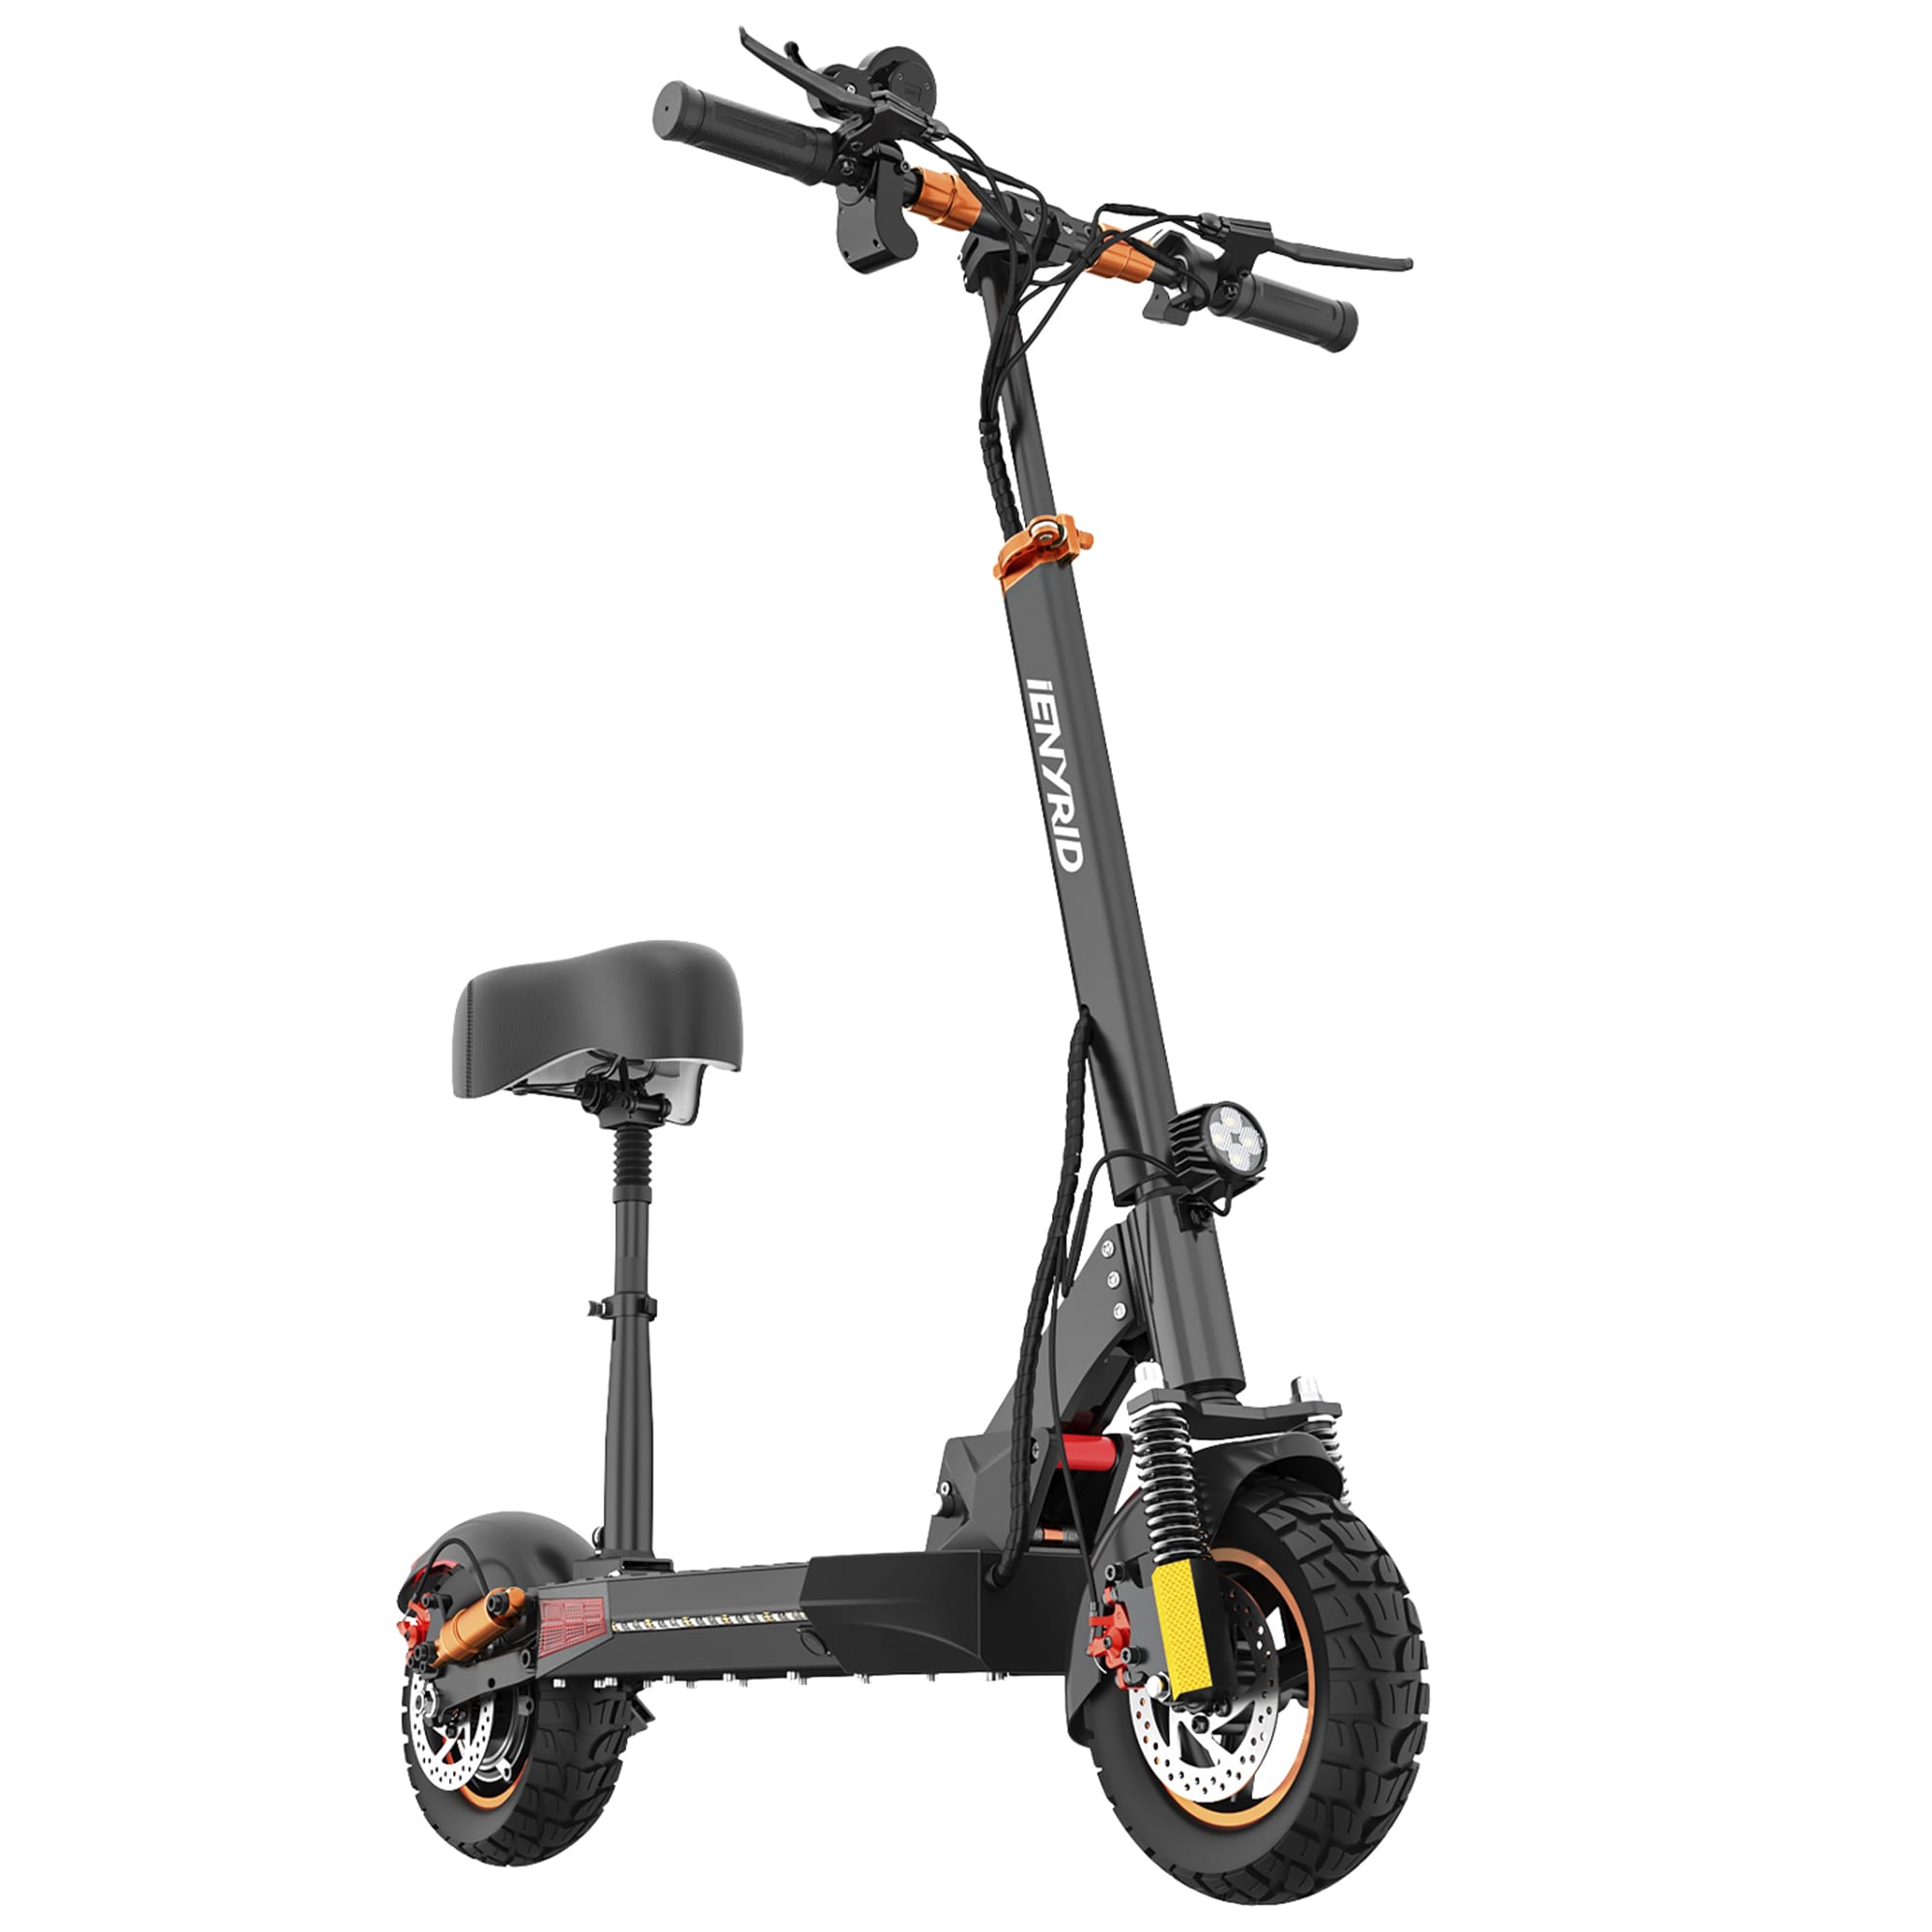 Flikkeren Schadelijk Soeverein Wildaven Electric Scooter,M4 Pro 10 inch Off-road Pneumatic Tires,Commuting  Scooter for Adults with 48V/10AH Lighium Battery in the Scooters department  at Lowes.com